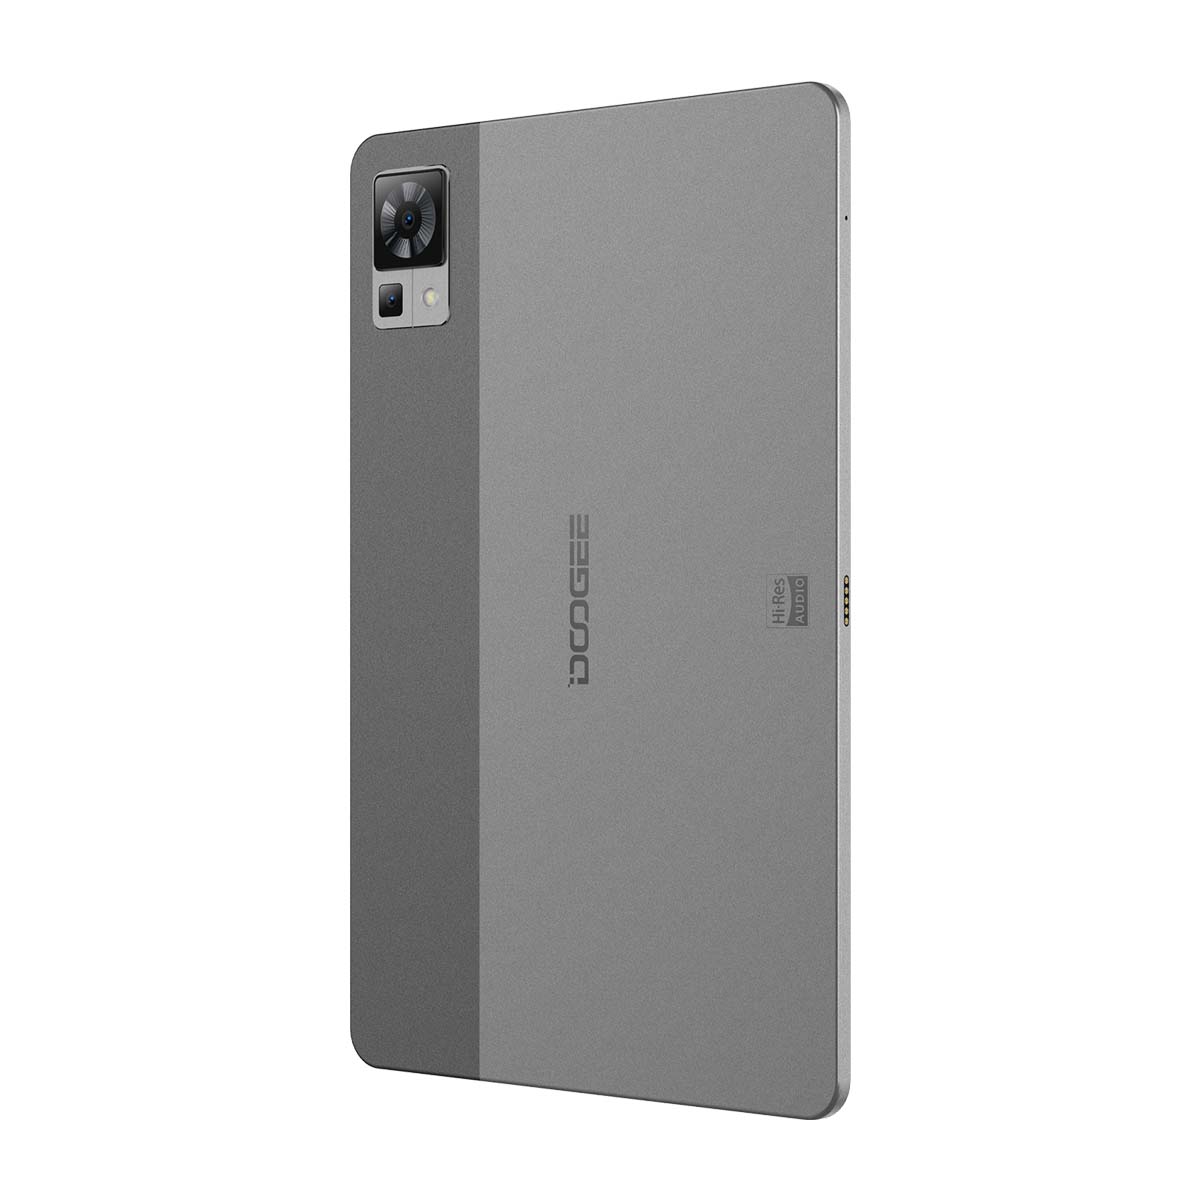 Doogee - Introducing the new Doogee T30 Pro Tablet PC with cutting